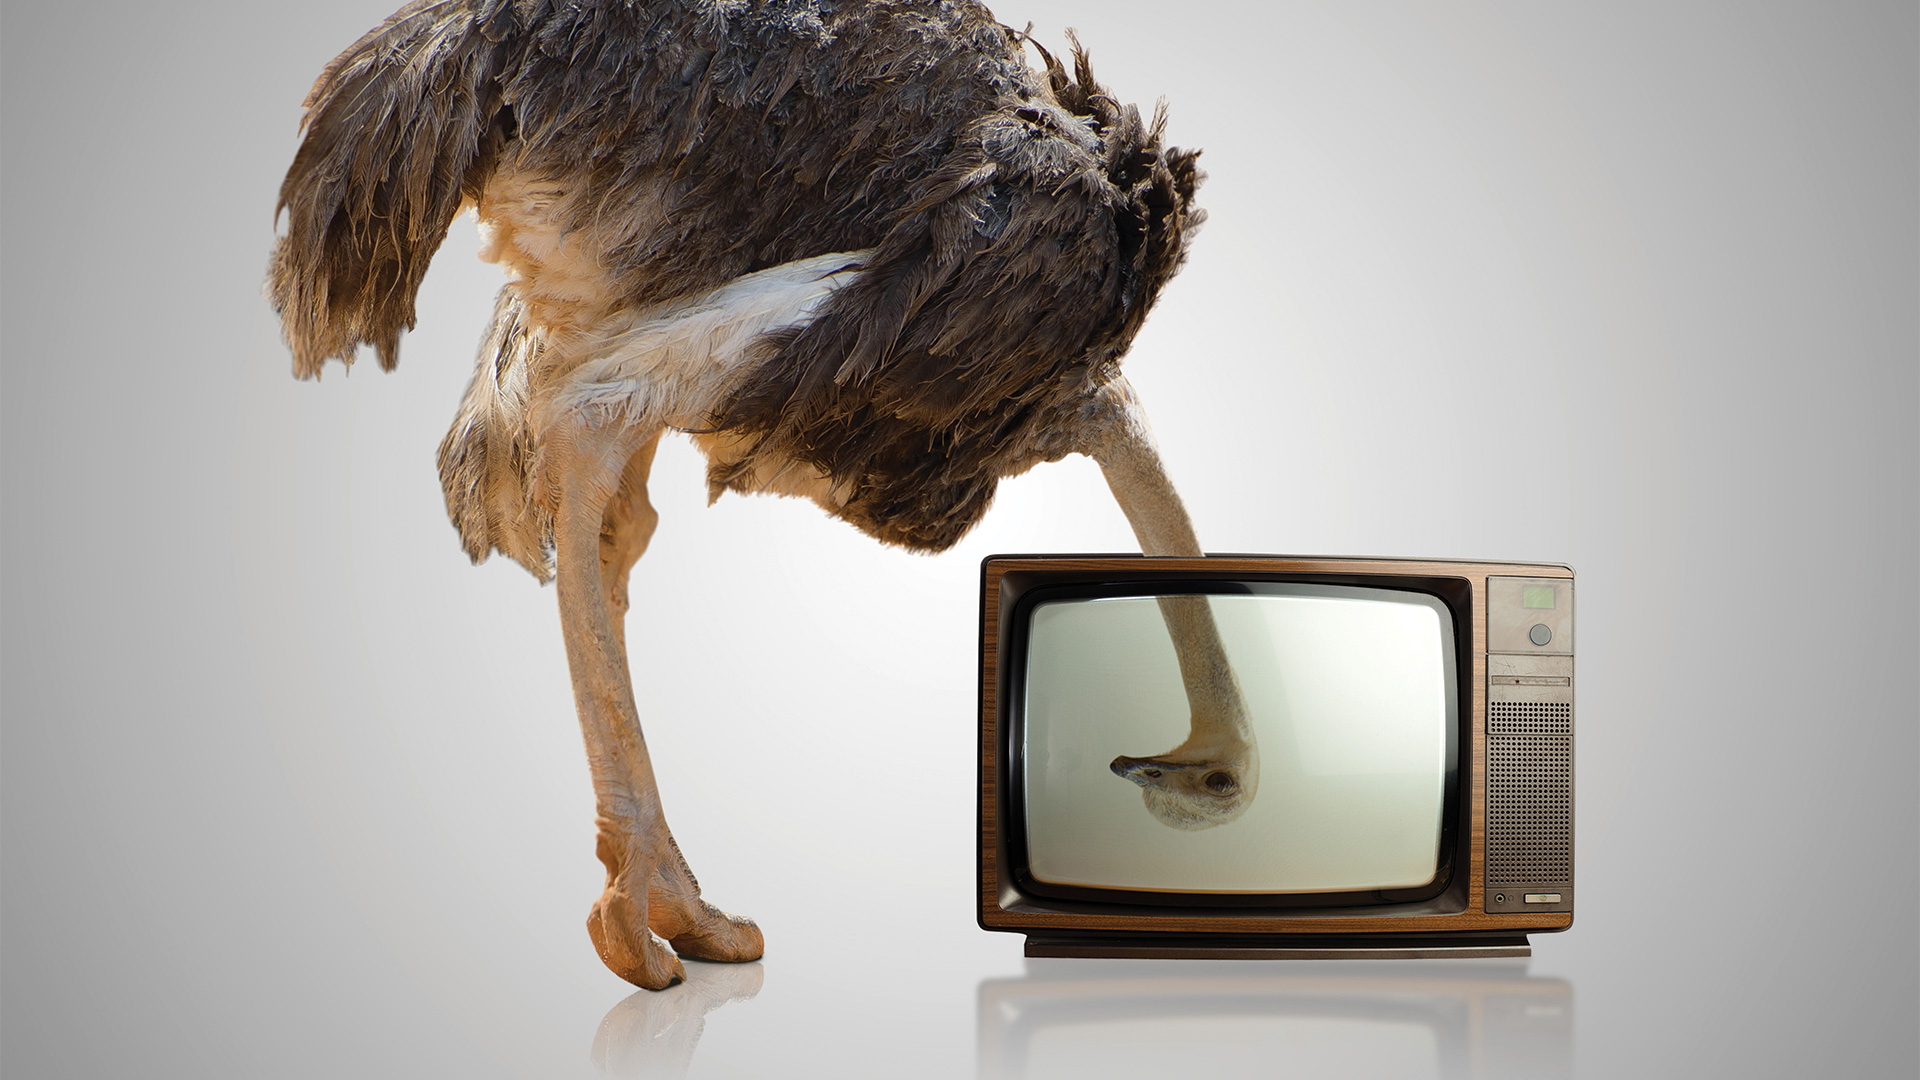 Ostrich looking through a television